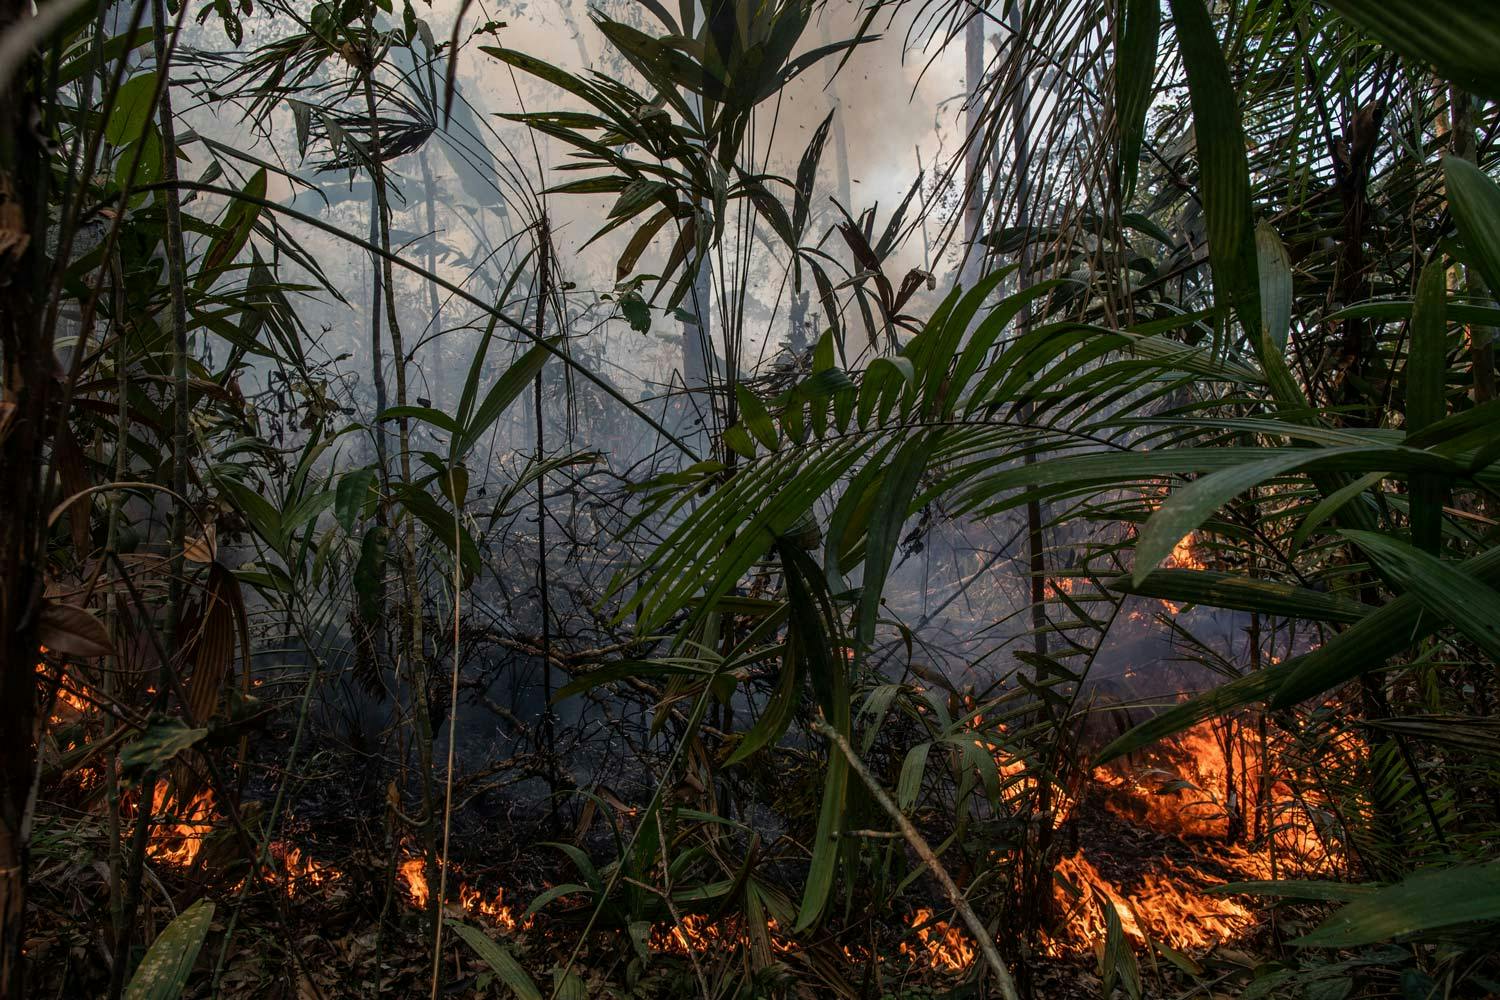 A fire burns a patch of ferns and trees in the Amazon rainforest, releasing thick smoke into the air.